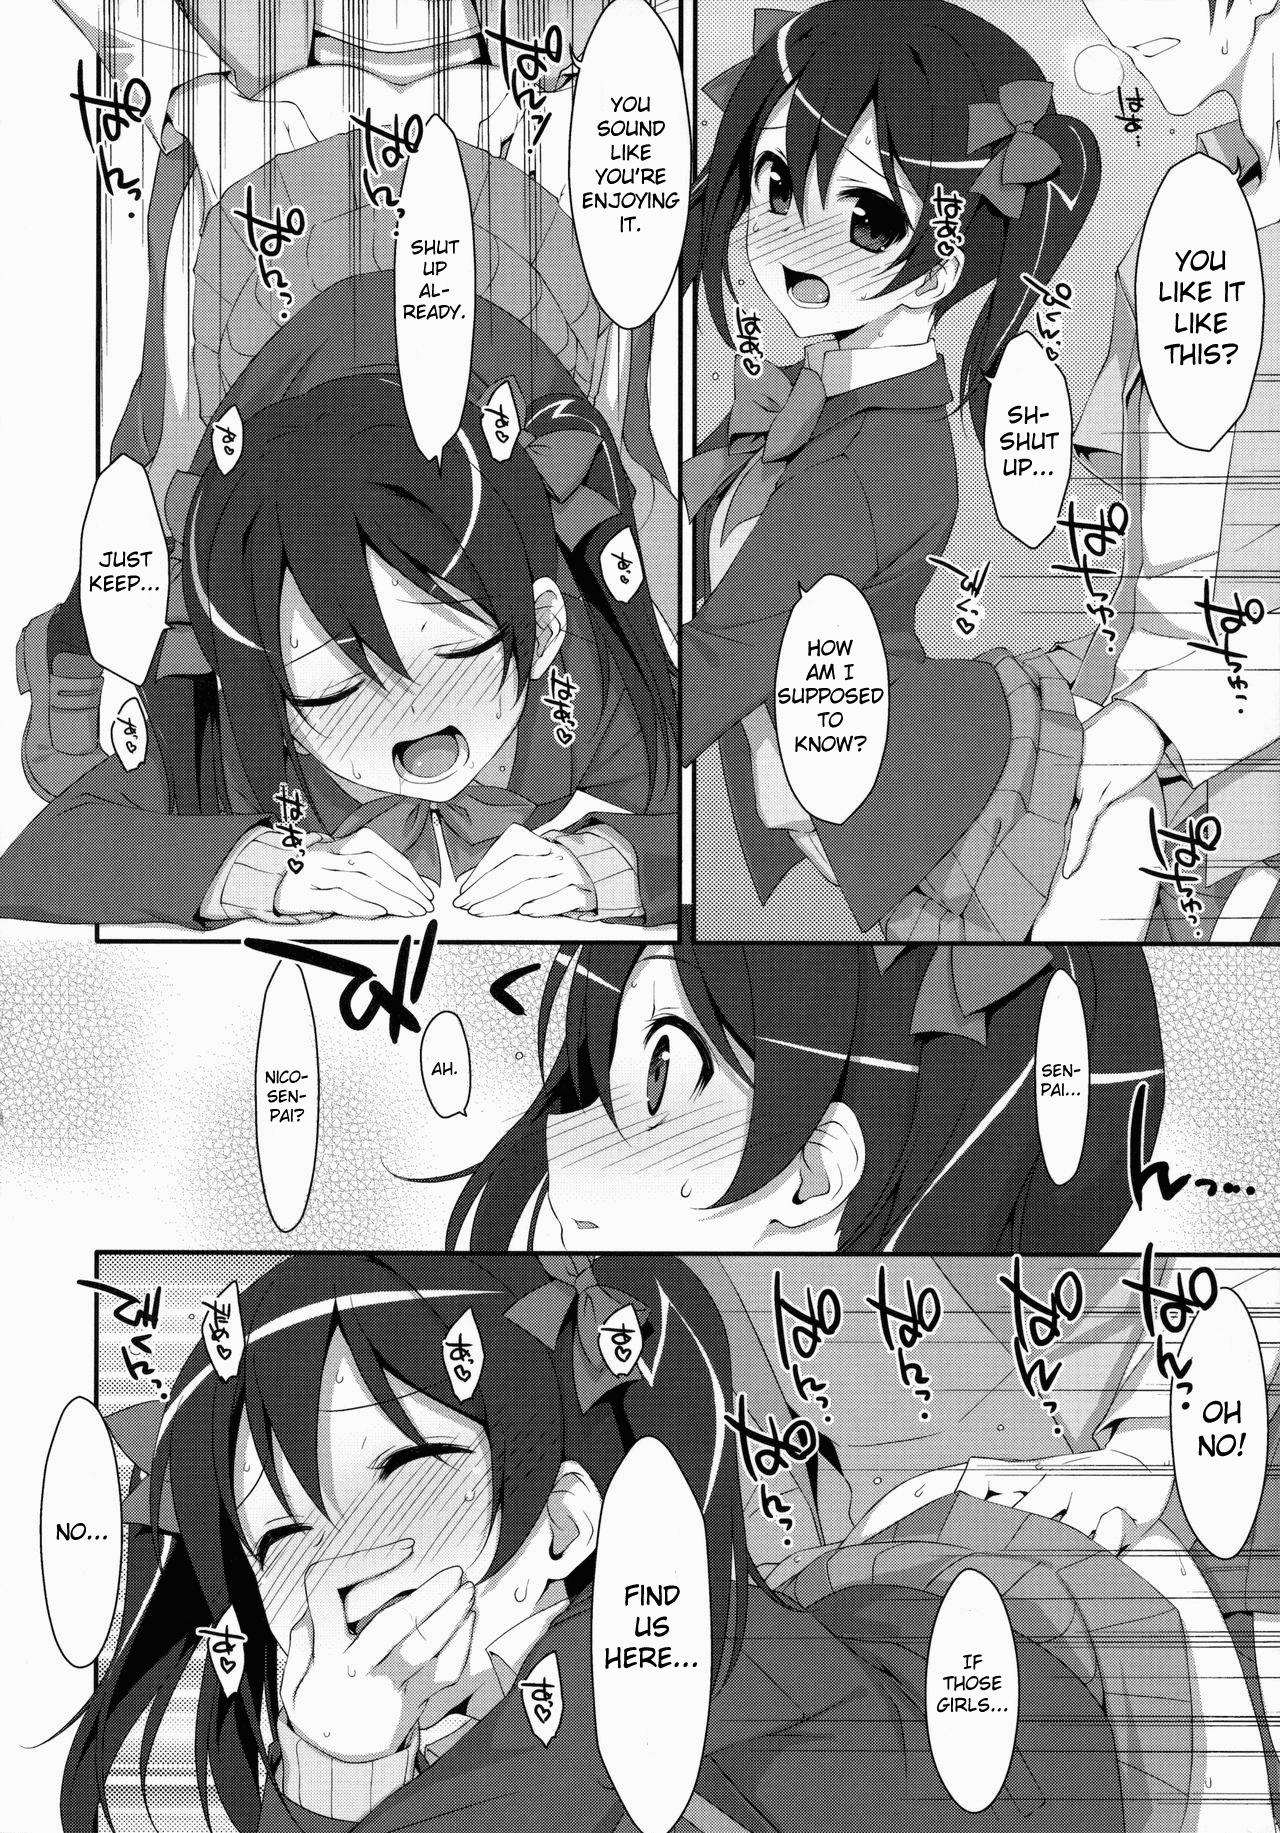 Best Blowjobs LOVE NICO! one two - Love live Young Old - Page 11